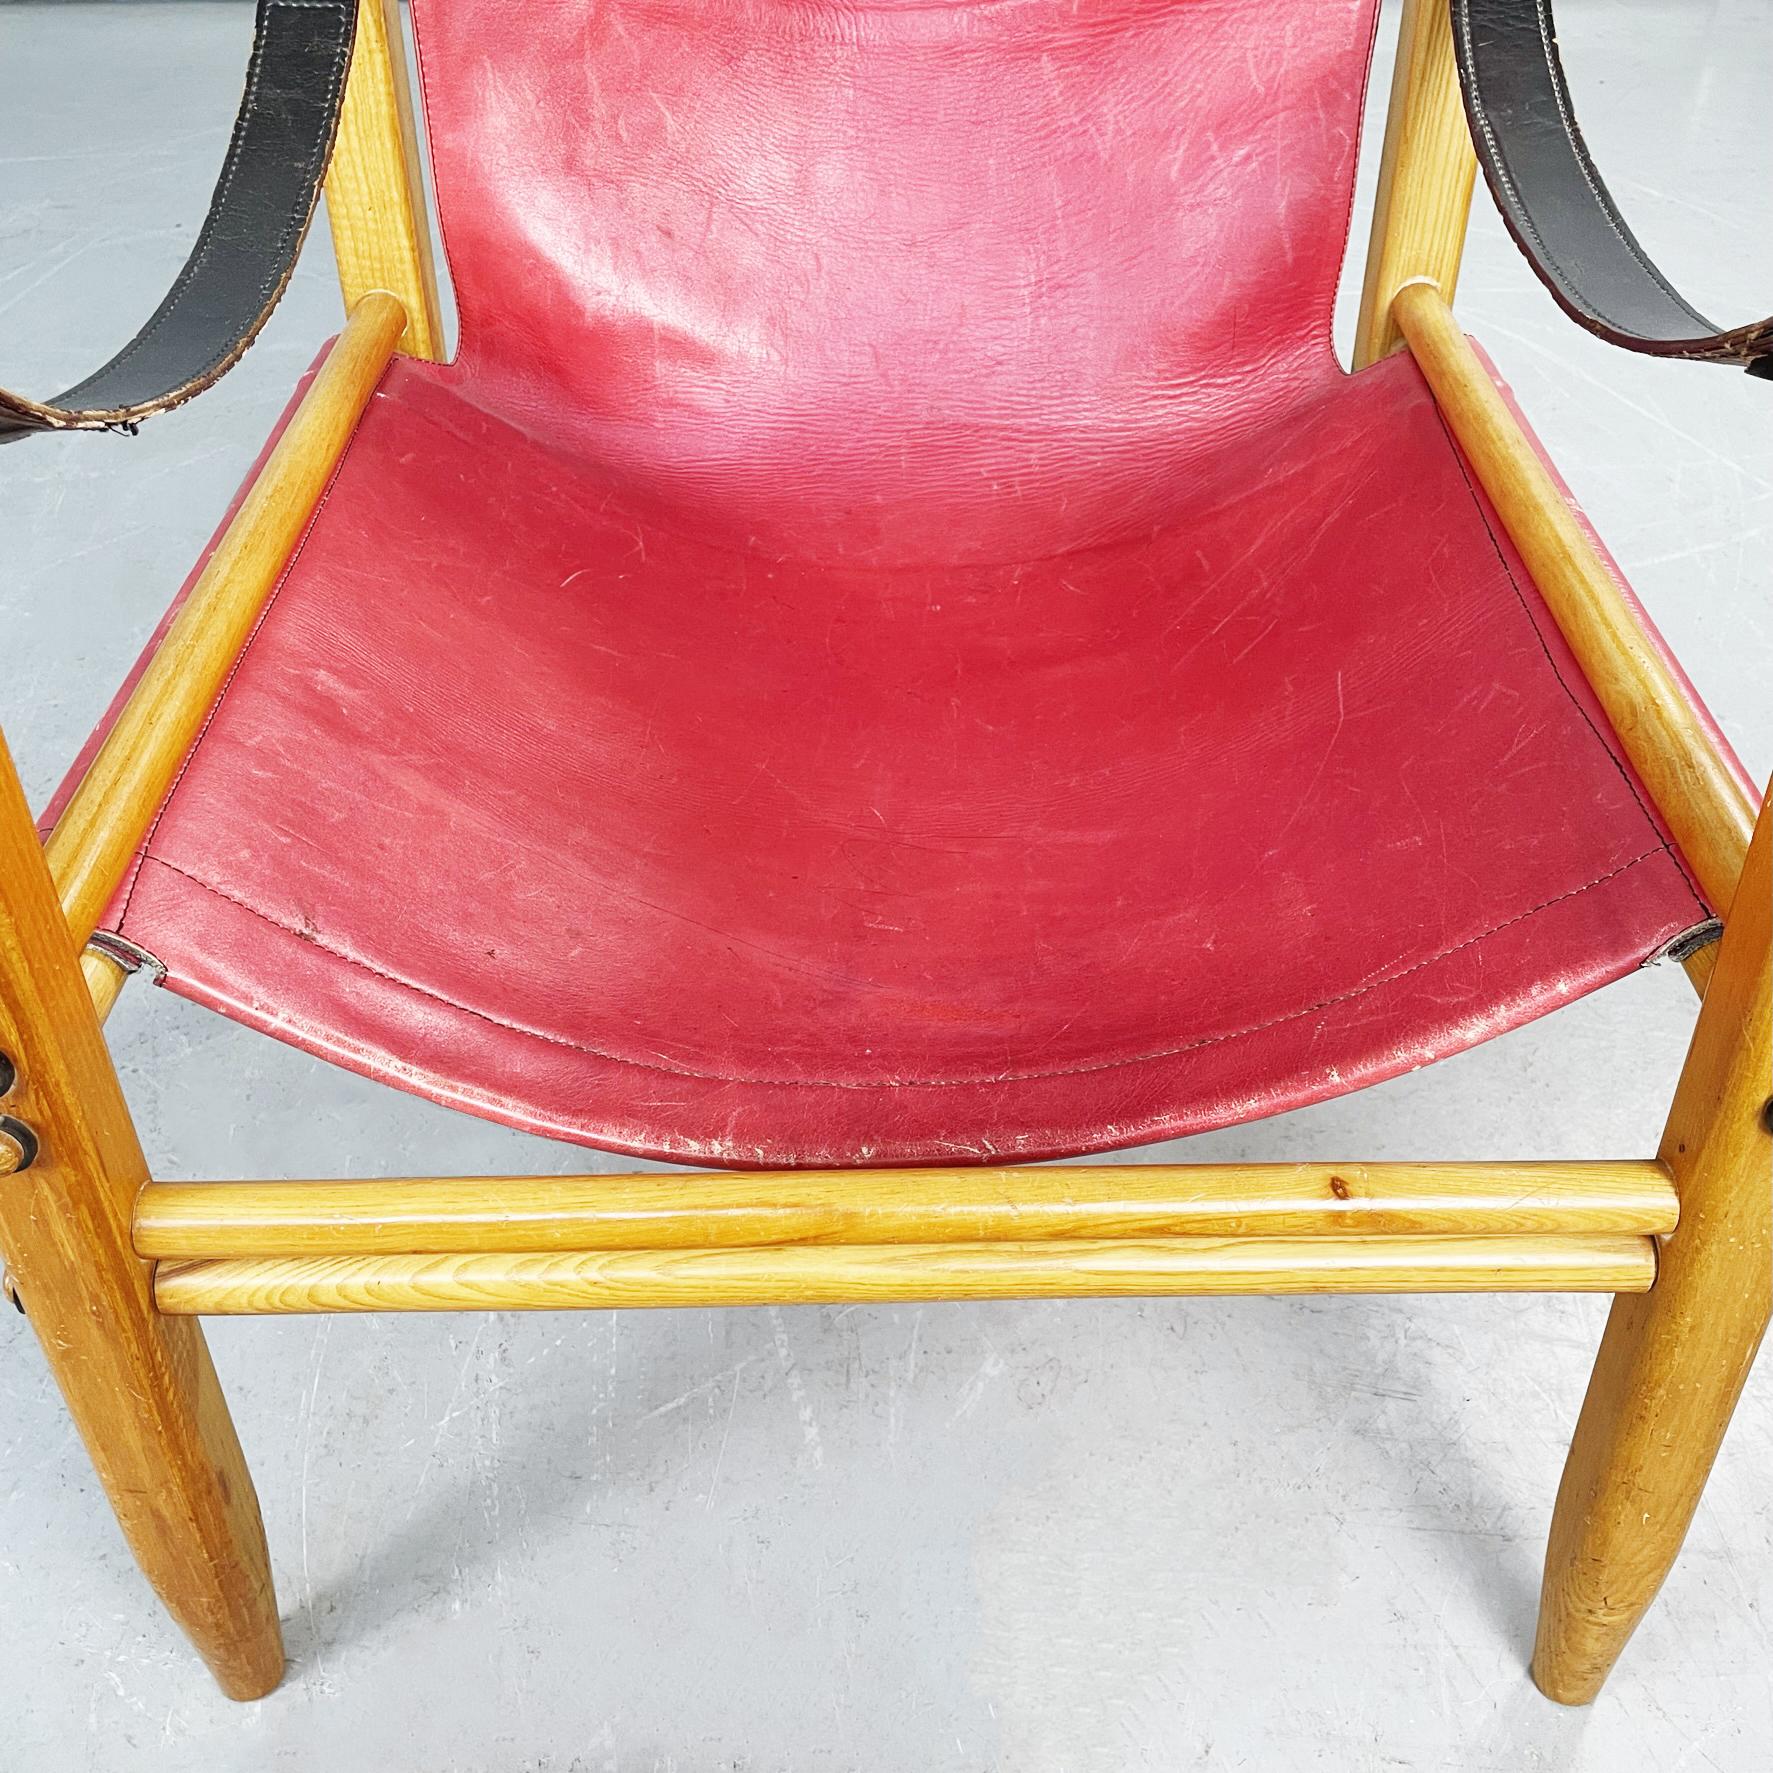 Italian Mid-Century Leather N Wood Armchair Oasi 85 by Legler for Zanotta, 1960s For Sale 1